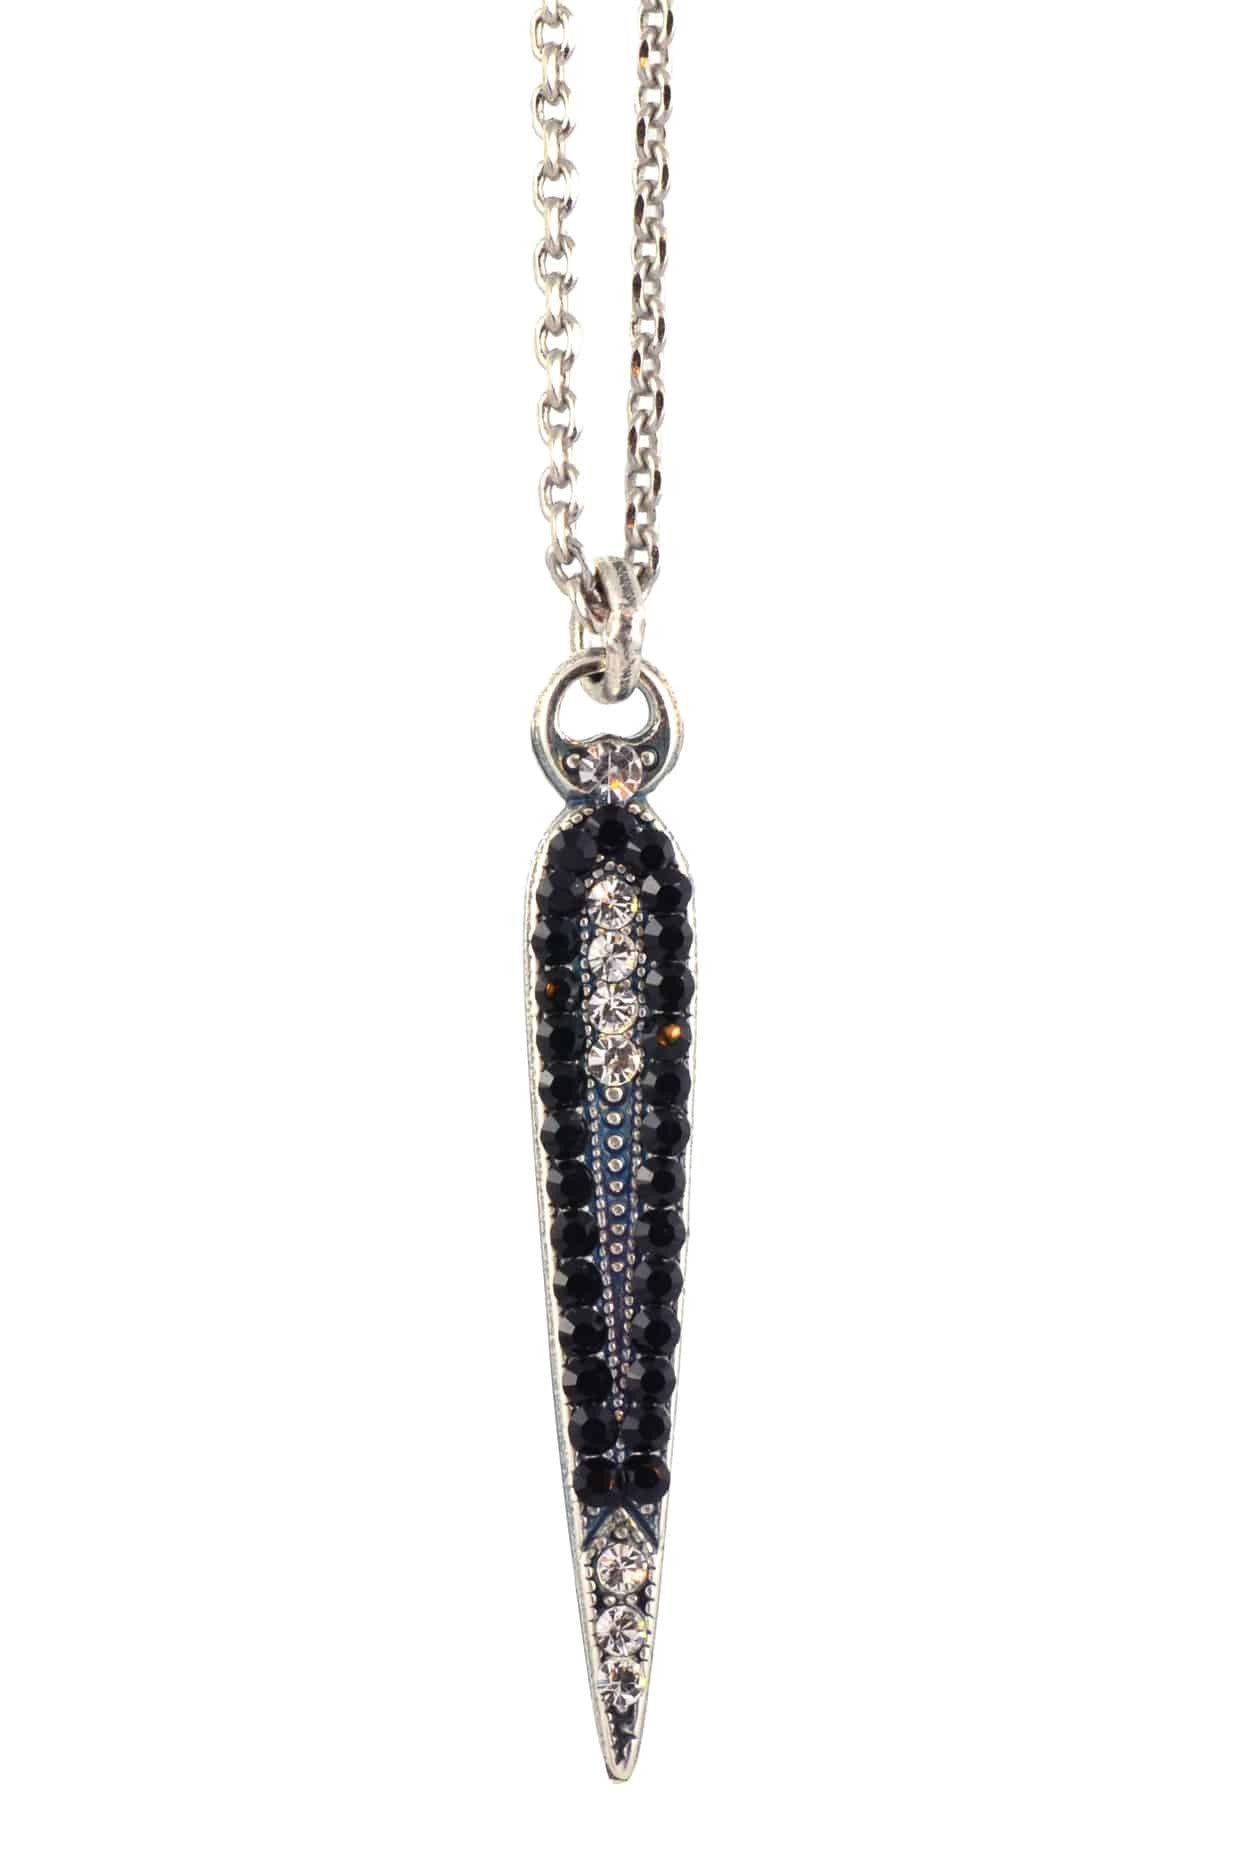 Mariana Jewelry Checkmate Art Deco Spike Pendant Necklace, Silver Plated with Black and Clear crystal , 14+4 5304 280-1